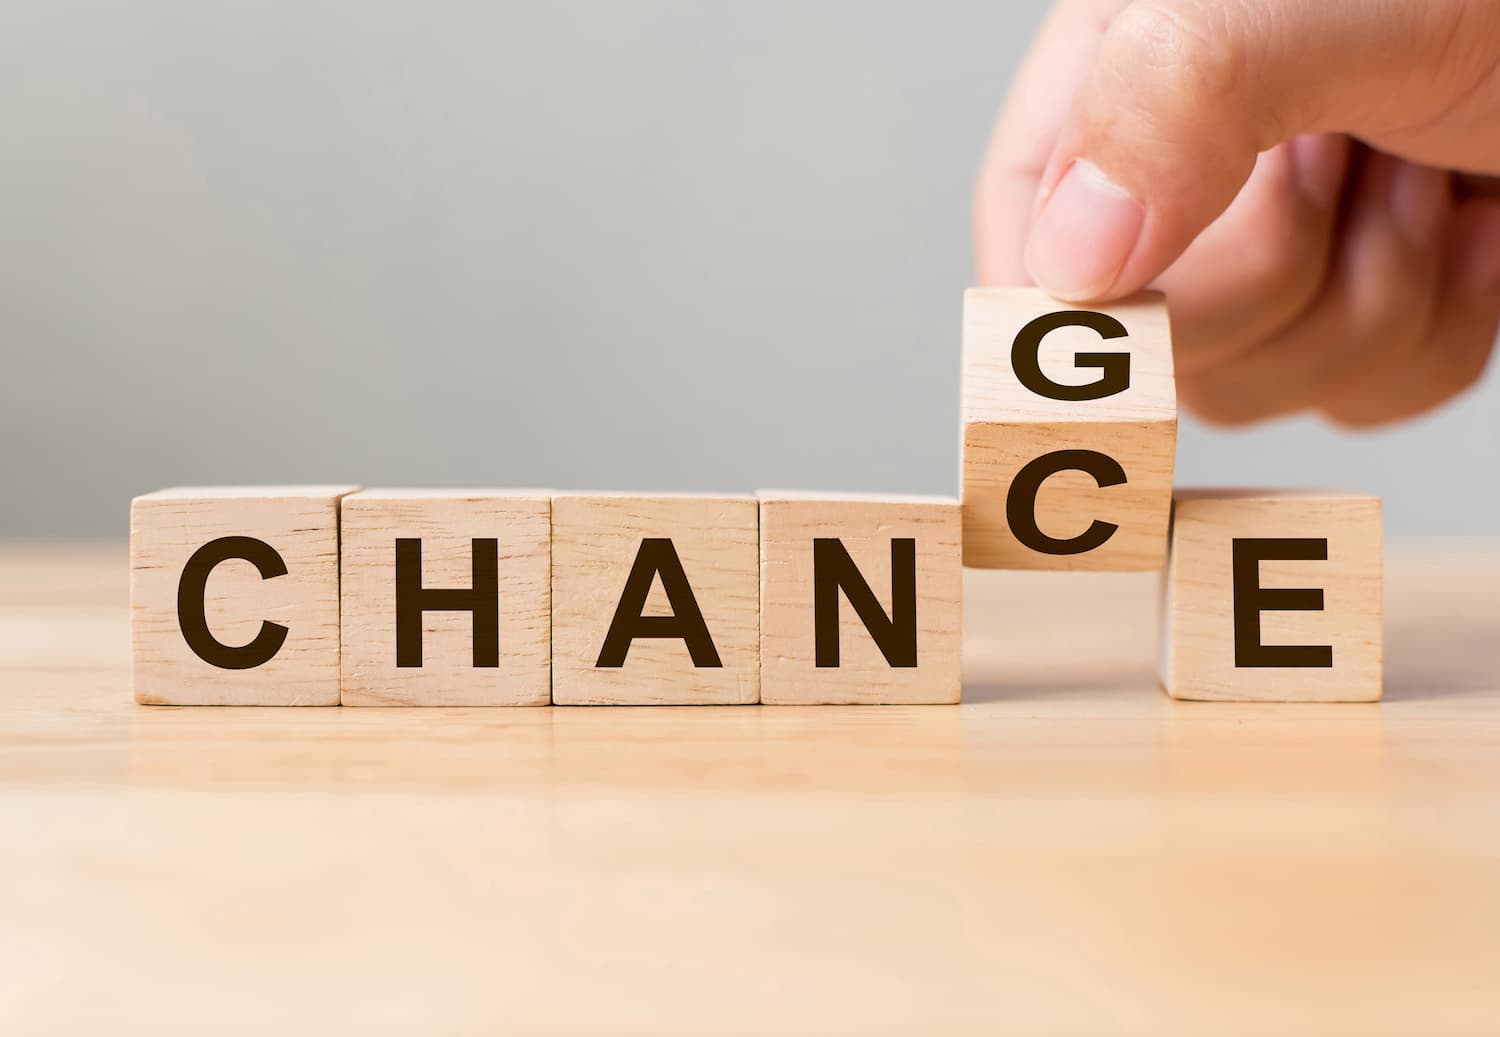 The word change is being changed into chance because one means the other